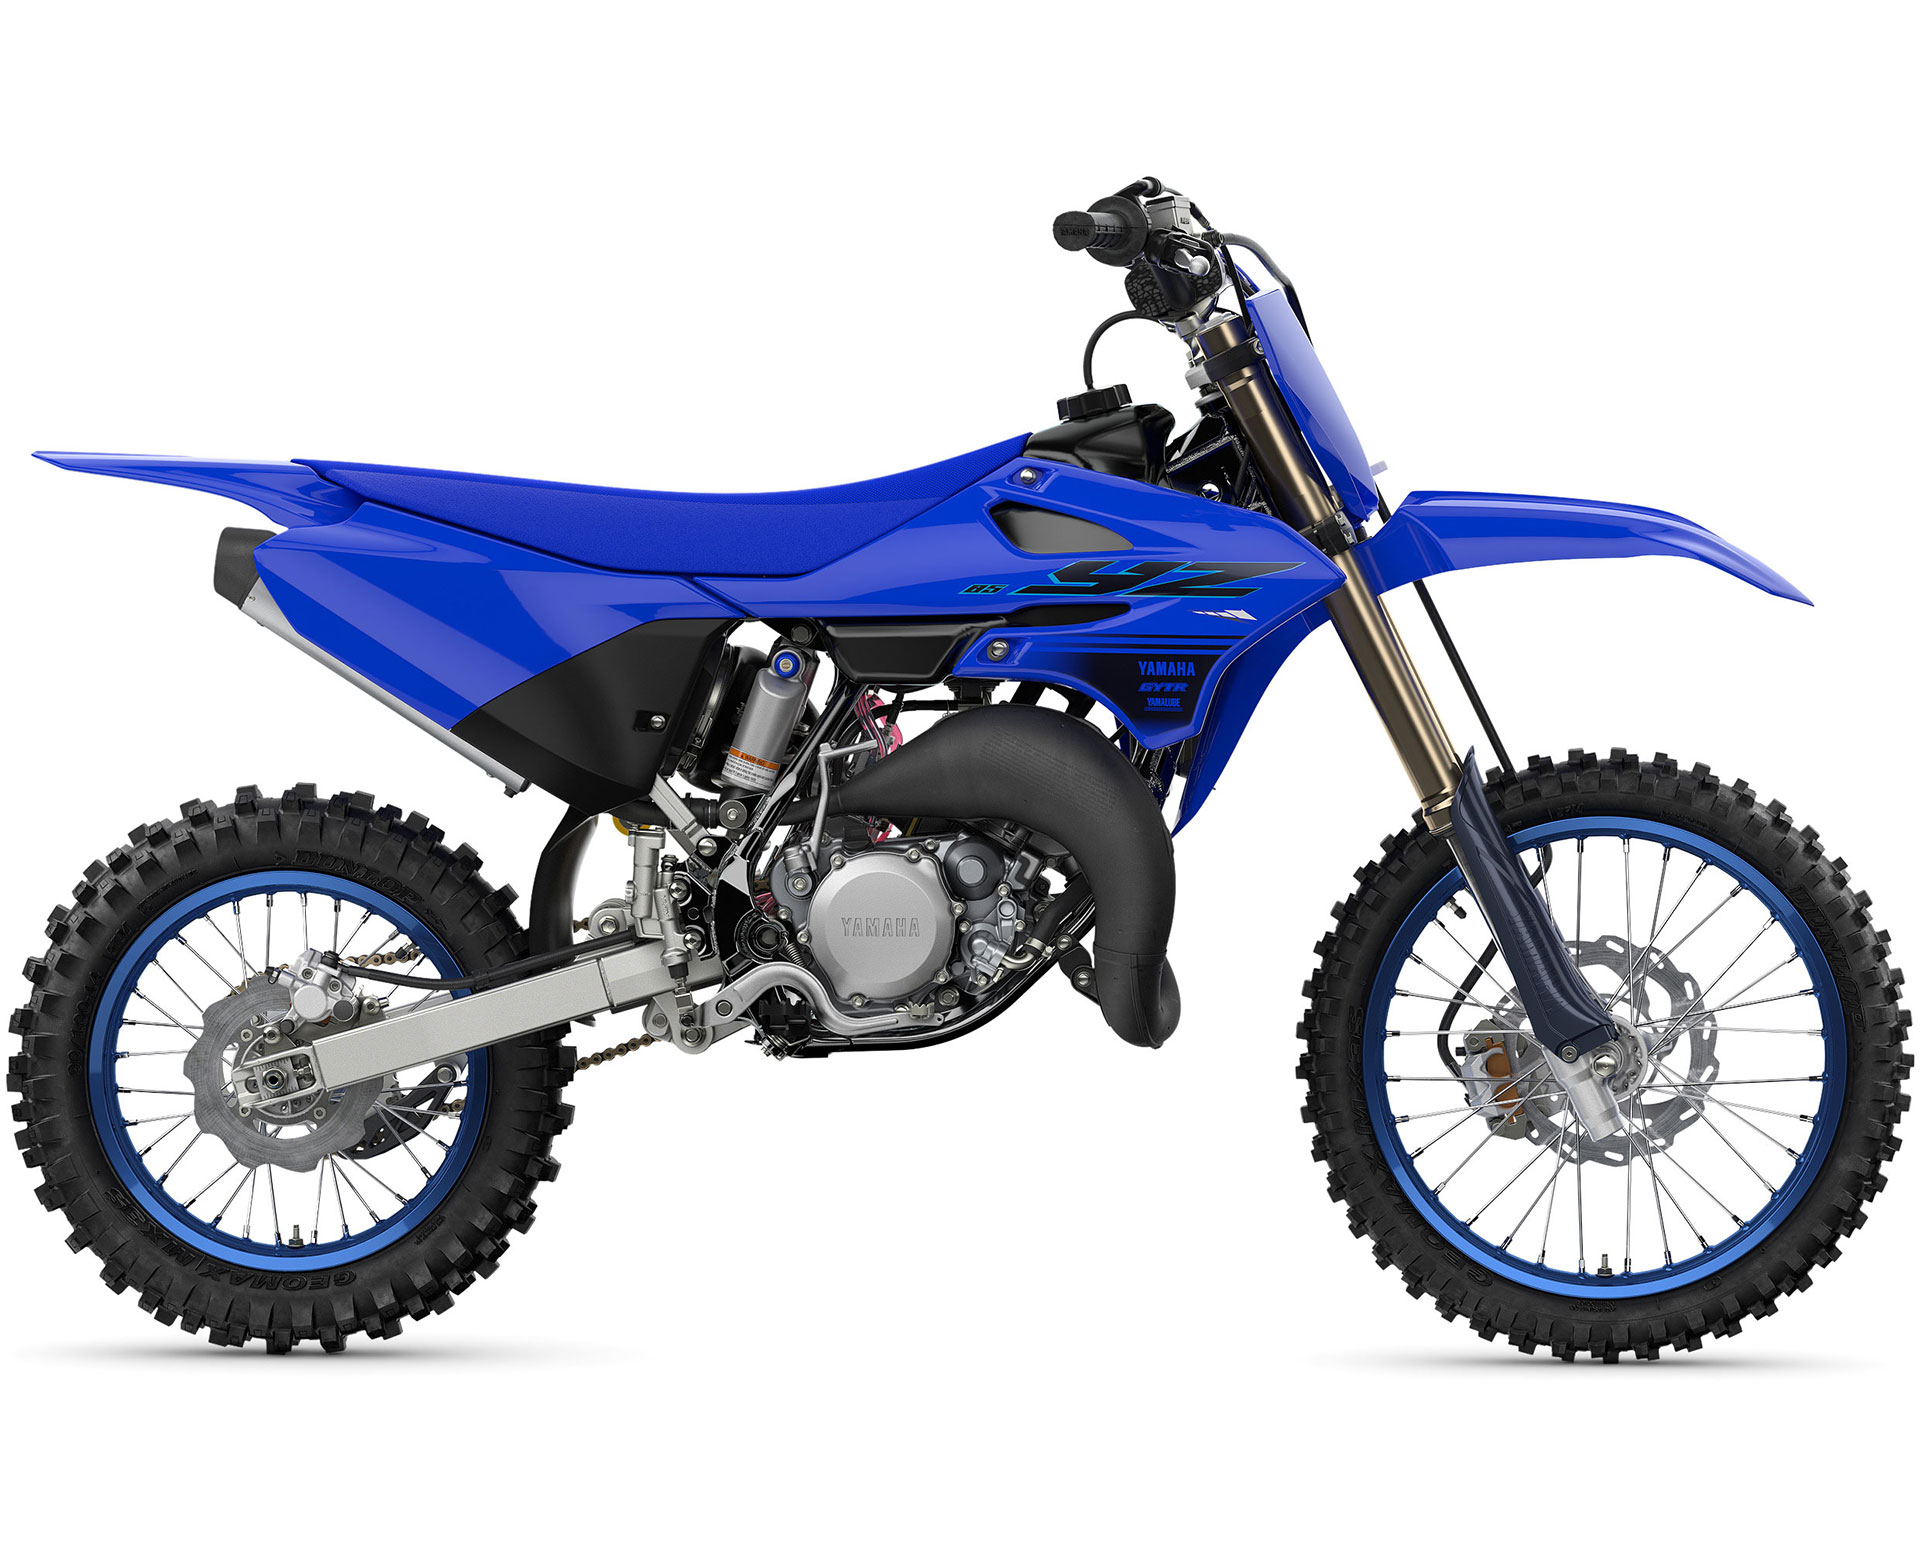 Thumbnail of your customized 2024 YZ85